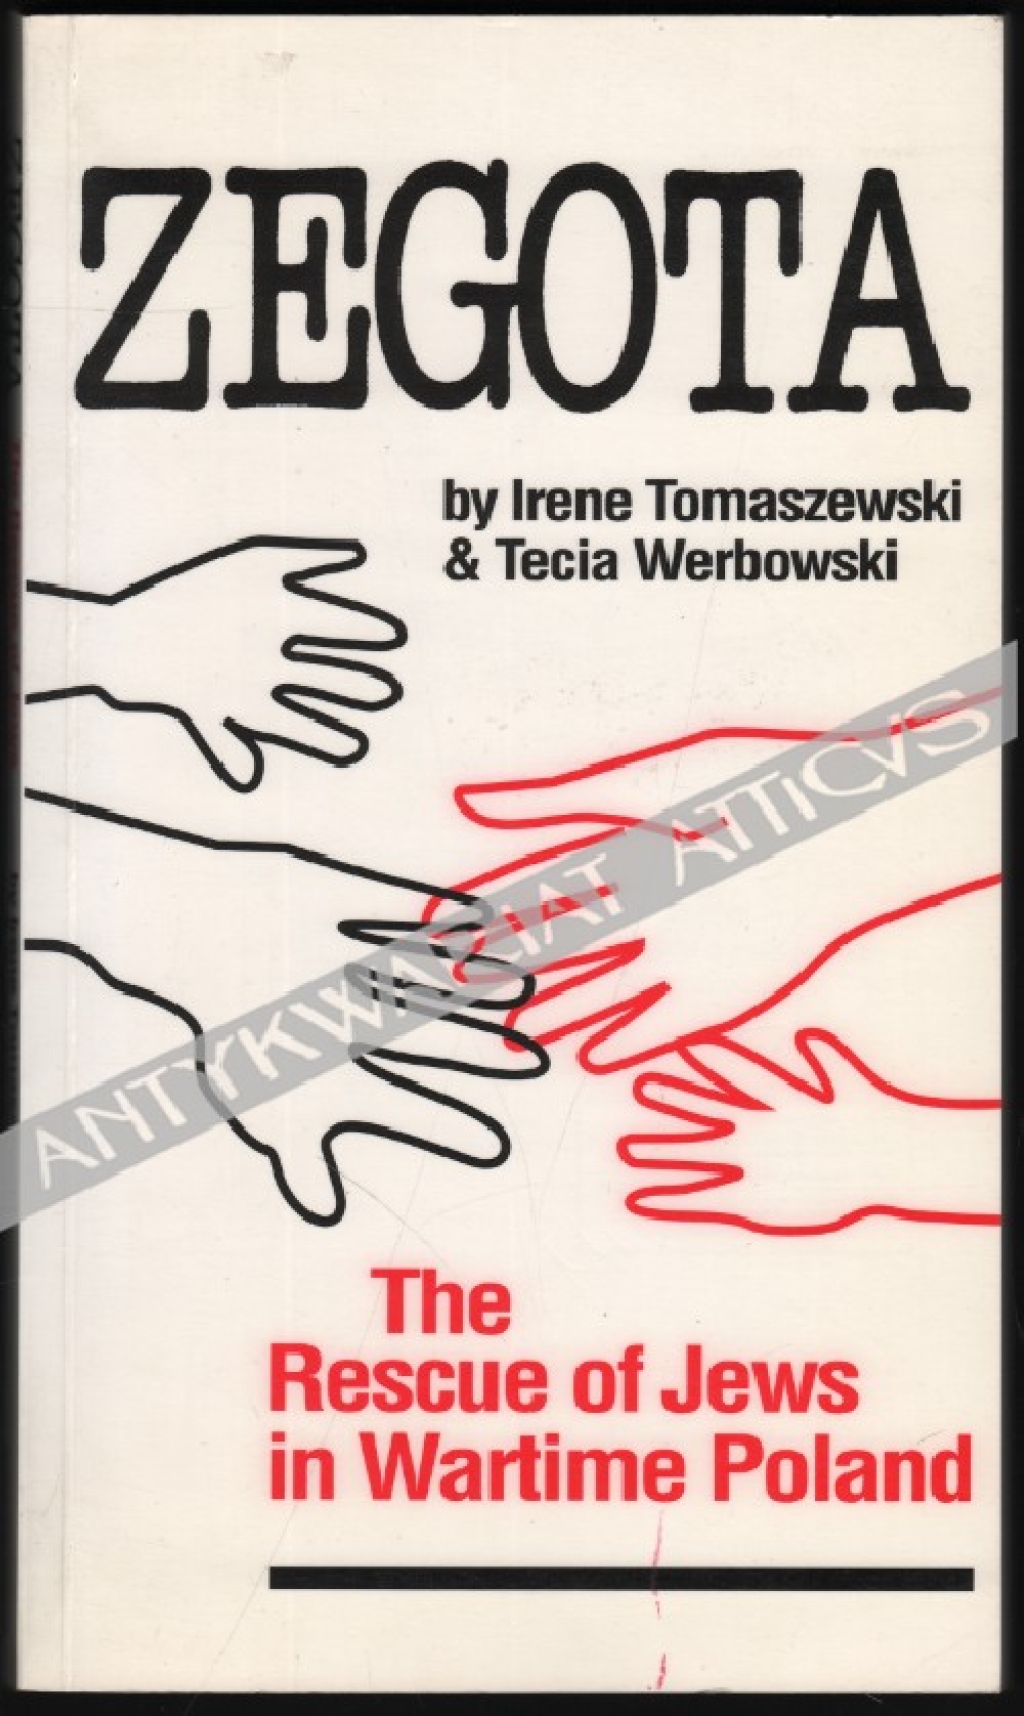 Zegota. The Rescue of Jews in Wartime Poland